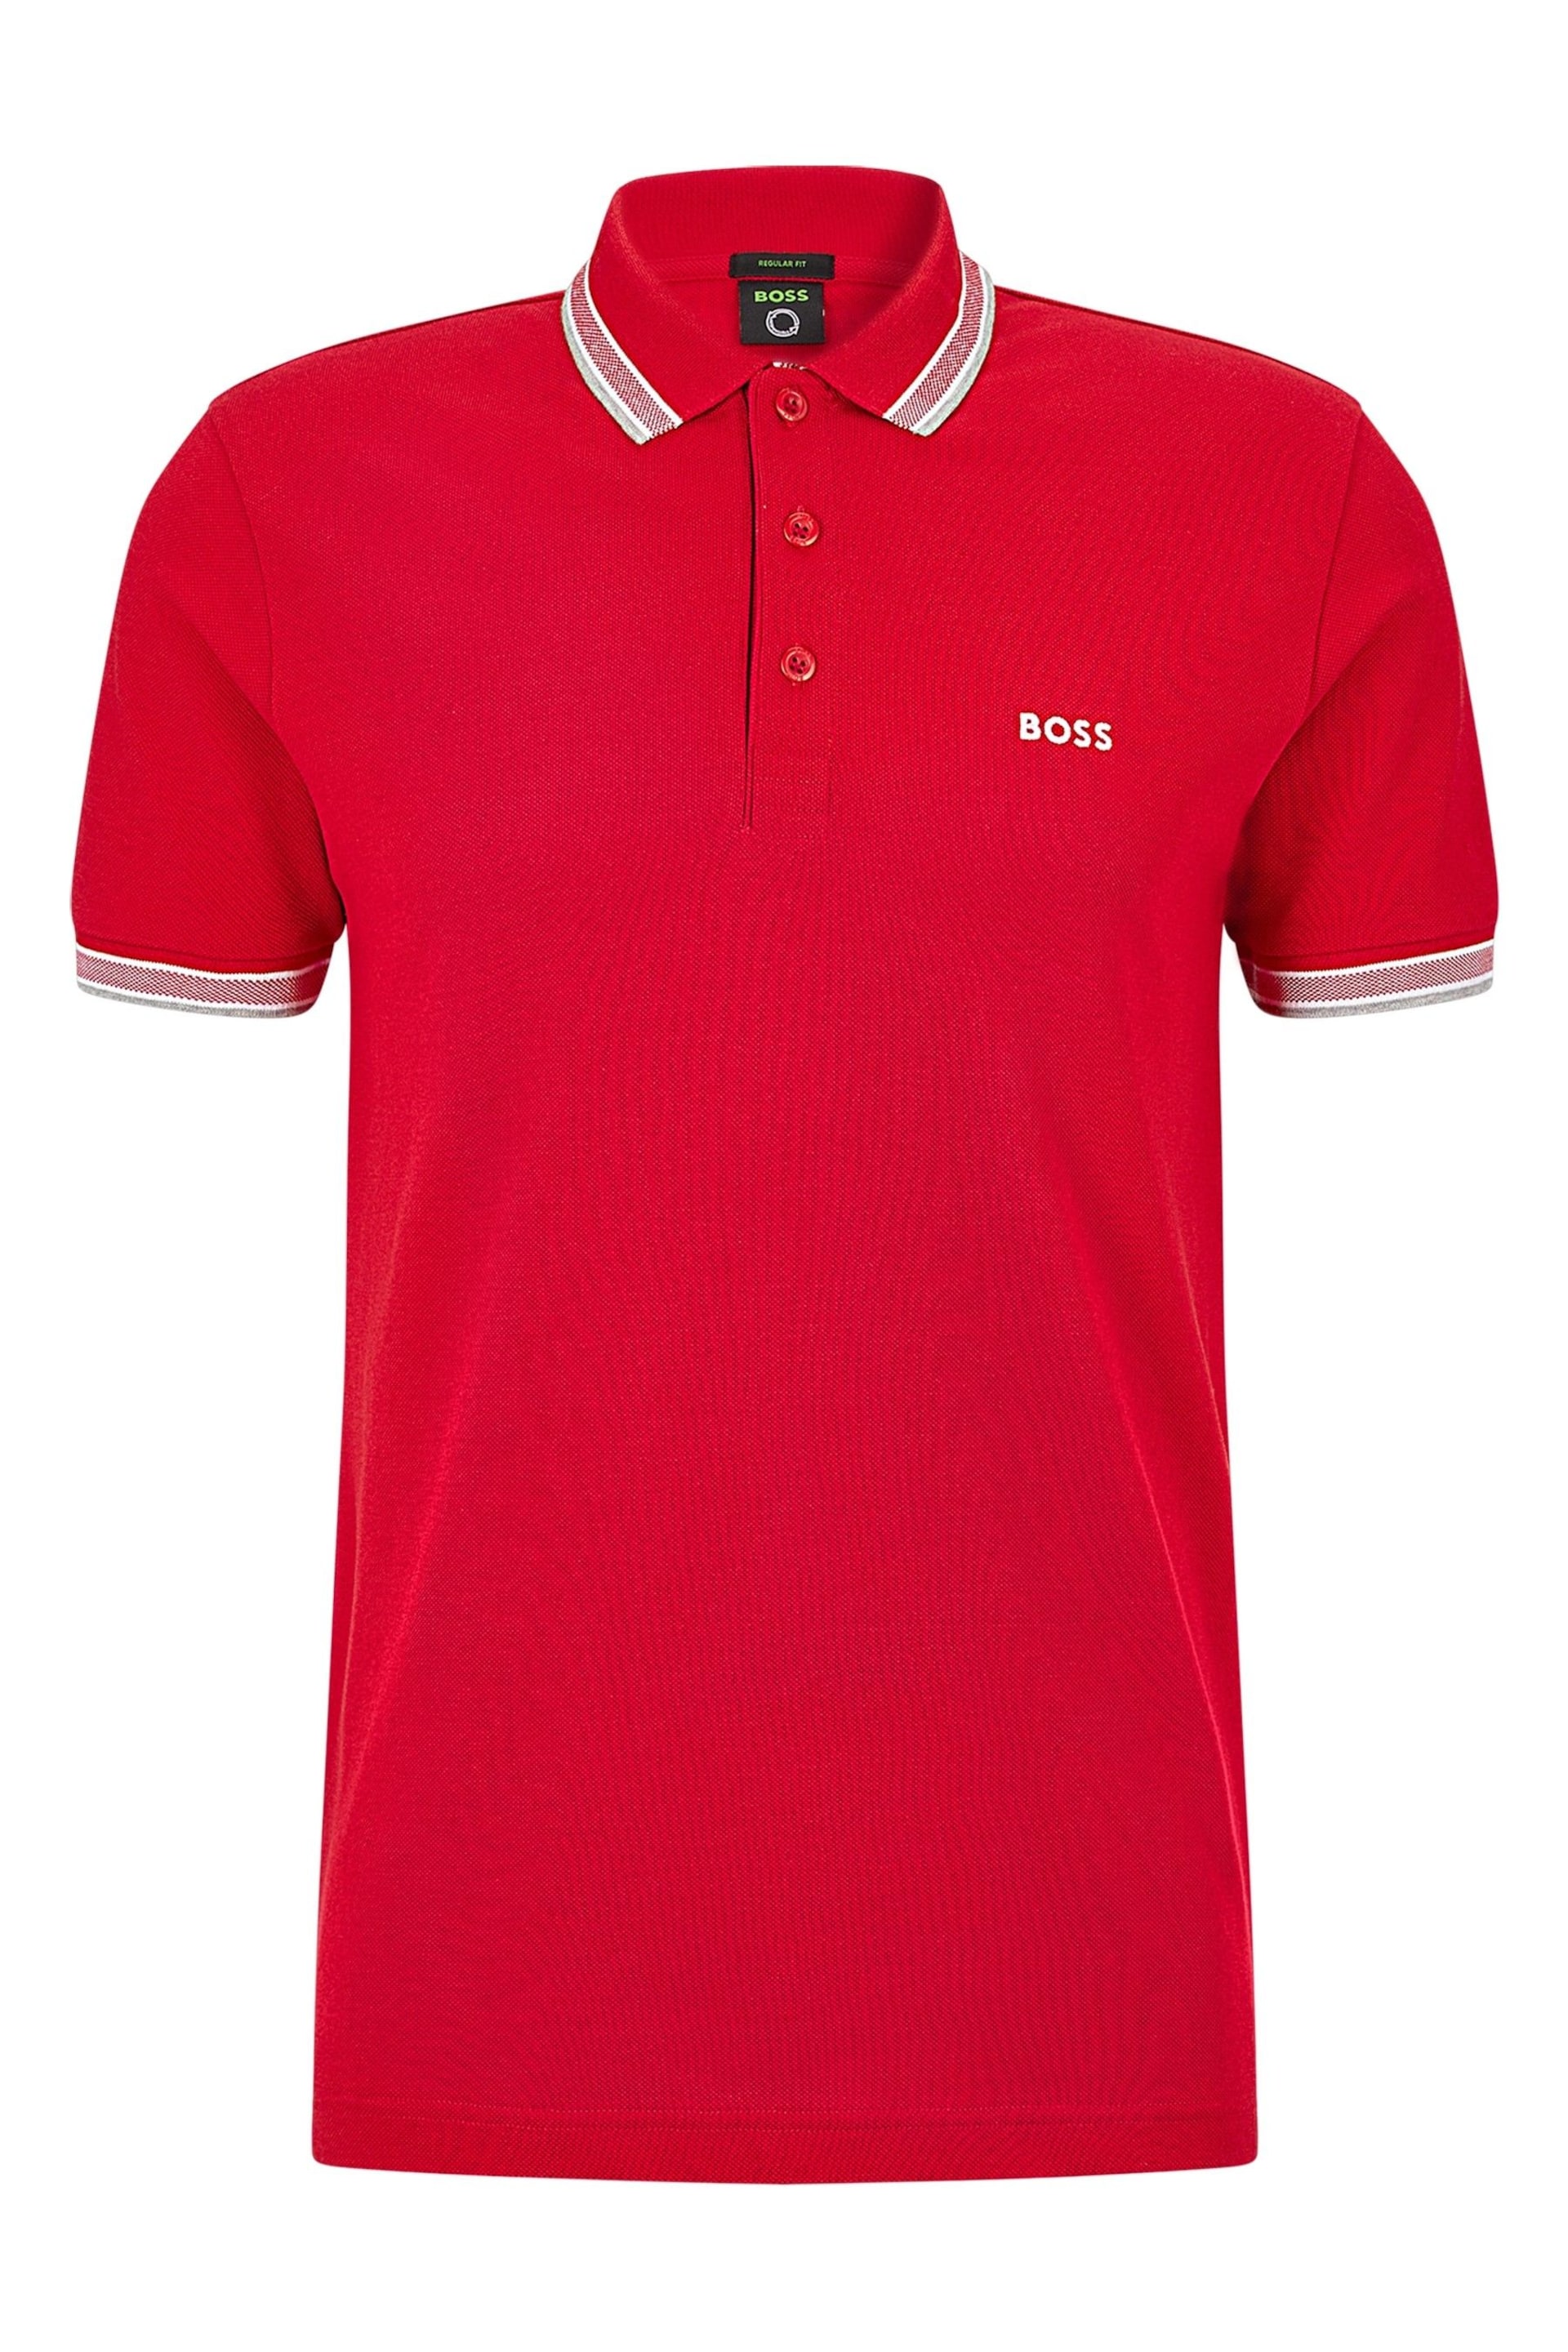 BOSS Red/Grey Tipping Paddy Polo Shirt - Image 5 of 5